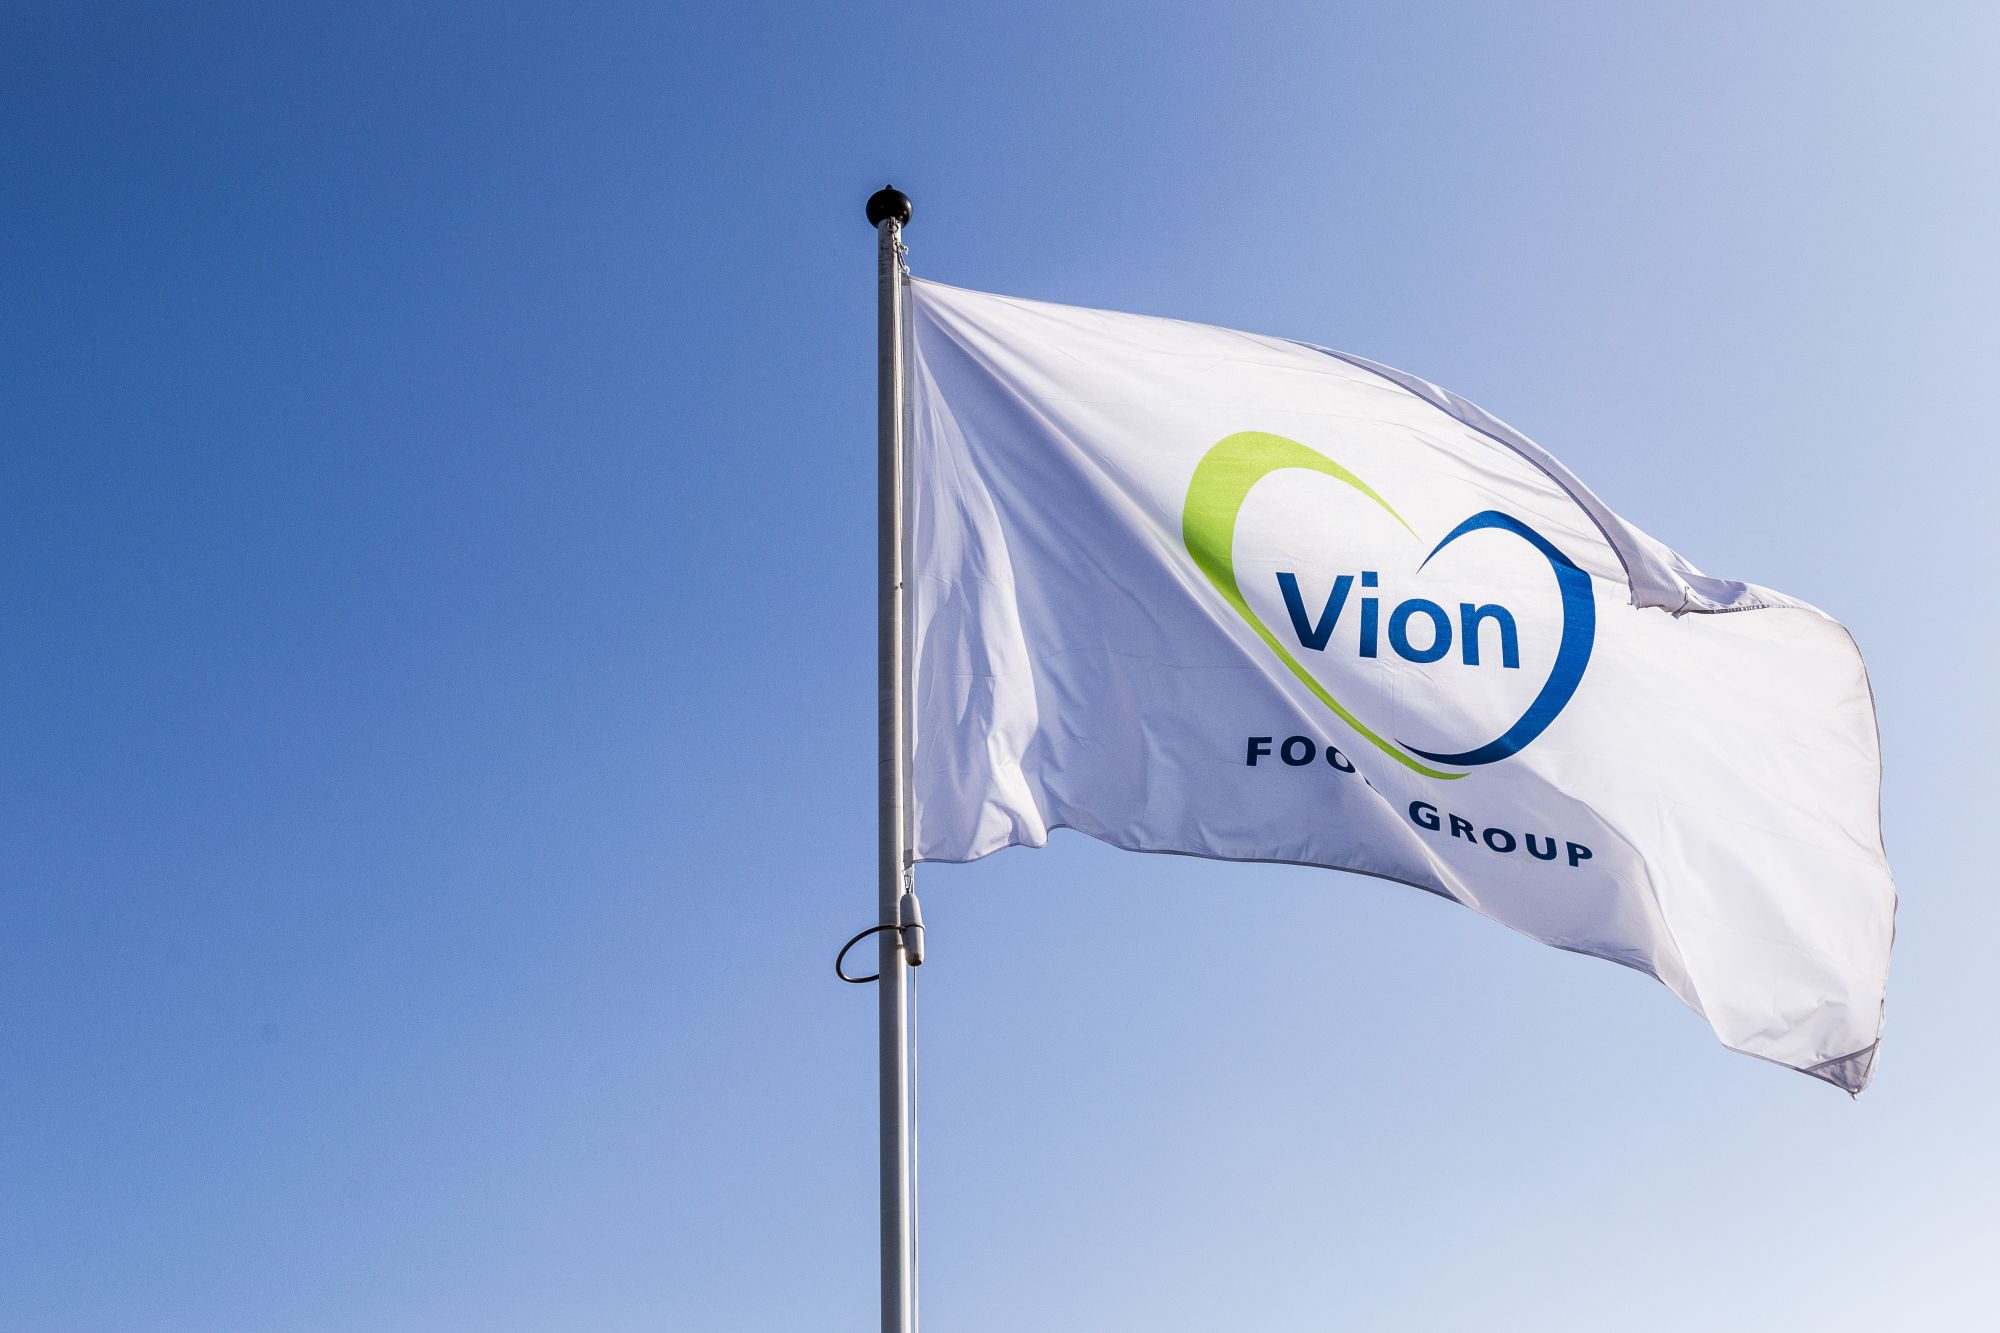 Vion increases focus on Benelux chains and continues portfolio review in Germany